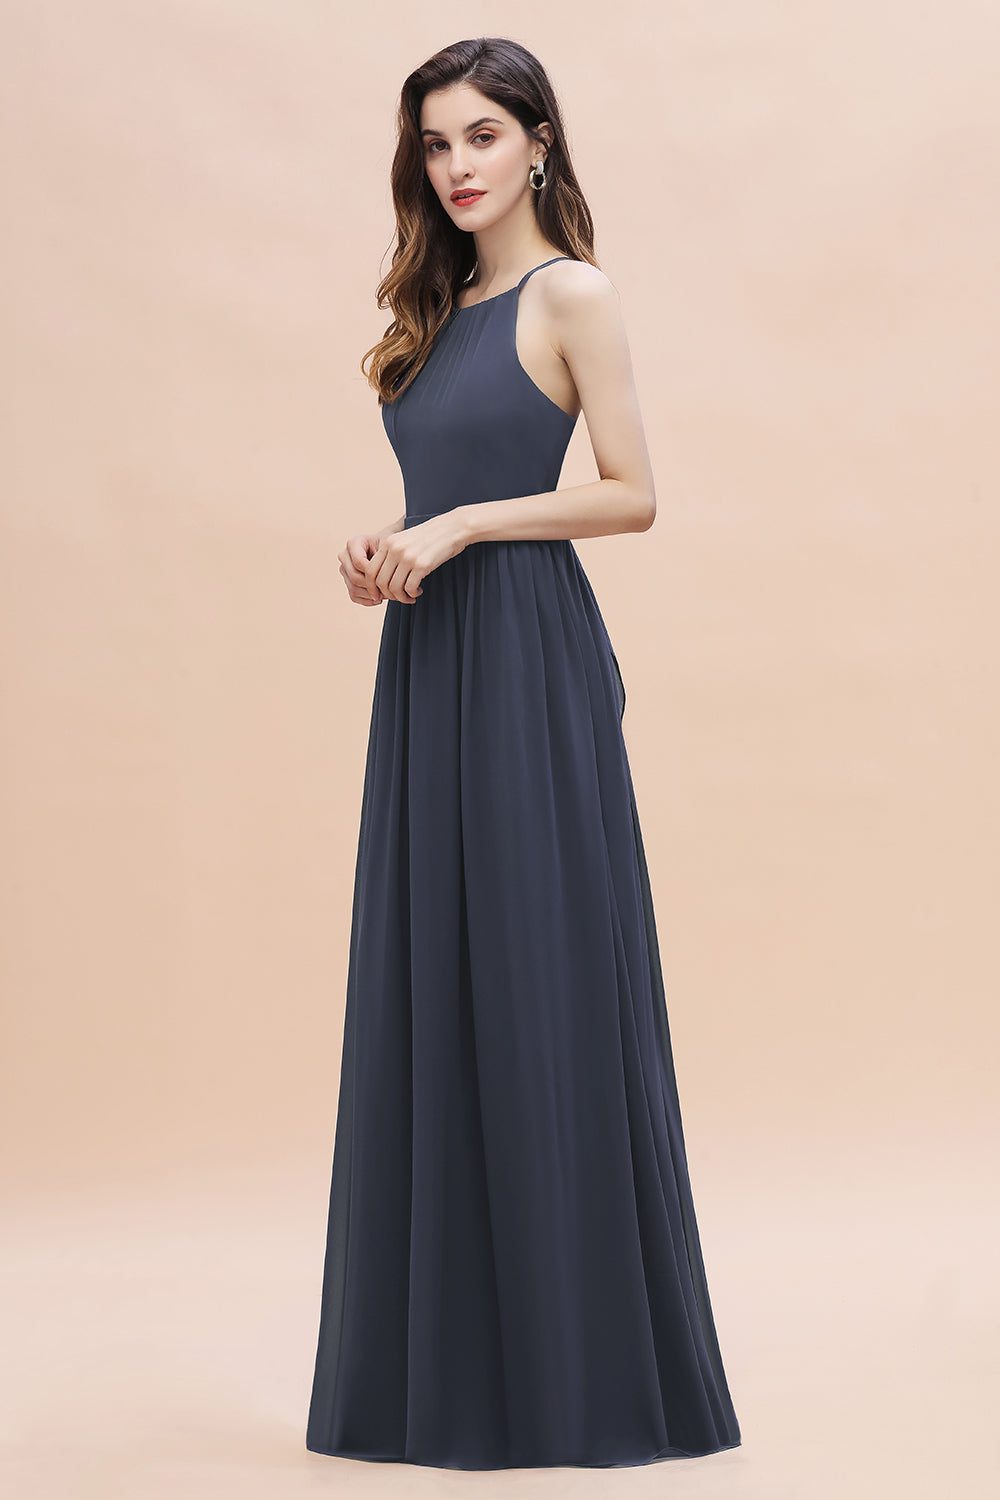 Load image into Gallery viewer, Affordable Jewel Sleeveless Stormy Chiffon Bridesmaid Dress with Ruffles Online-27dress
